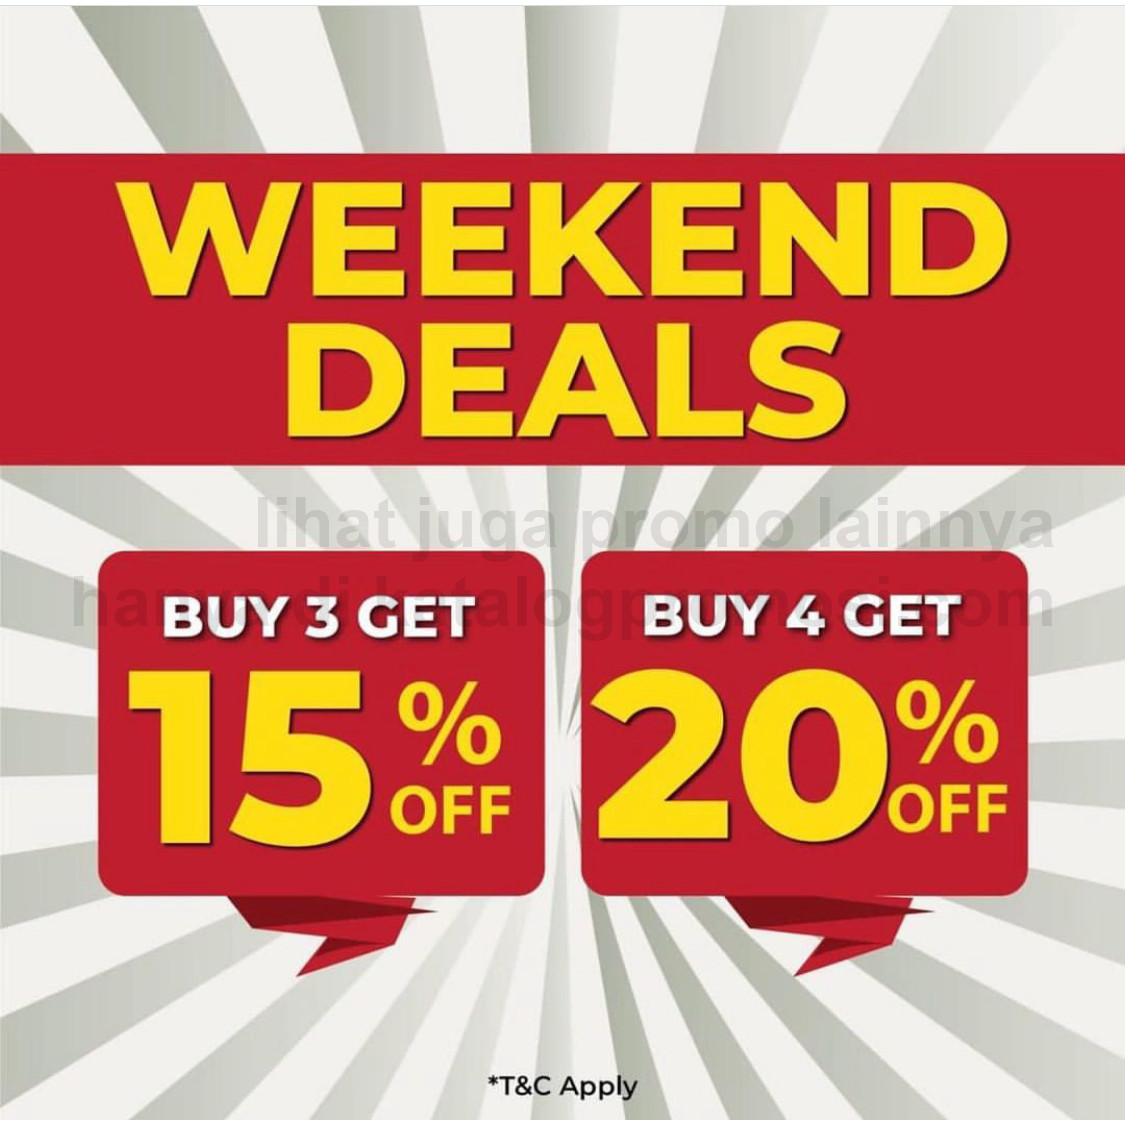 Promo MAX FASHIONS WEEKEND DEALS - BUY MORE SAVE MORE! DISCOUNT up to 20% off